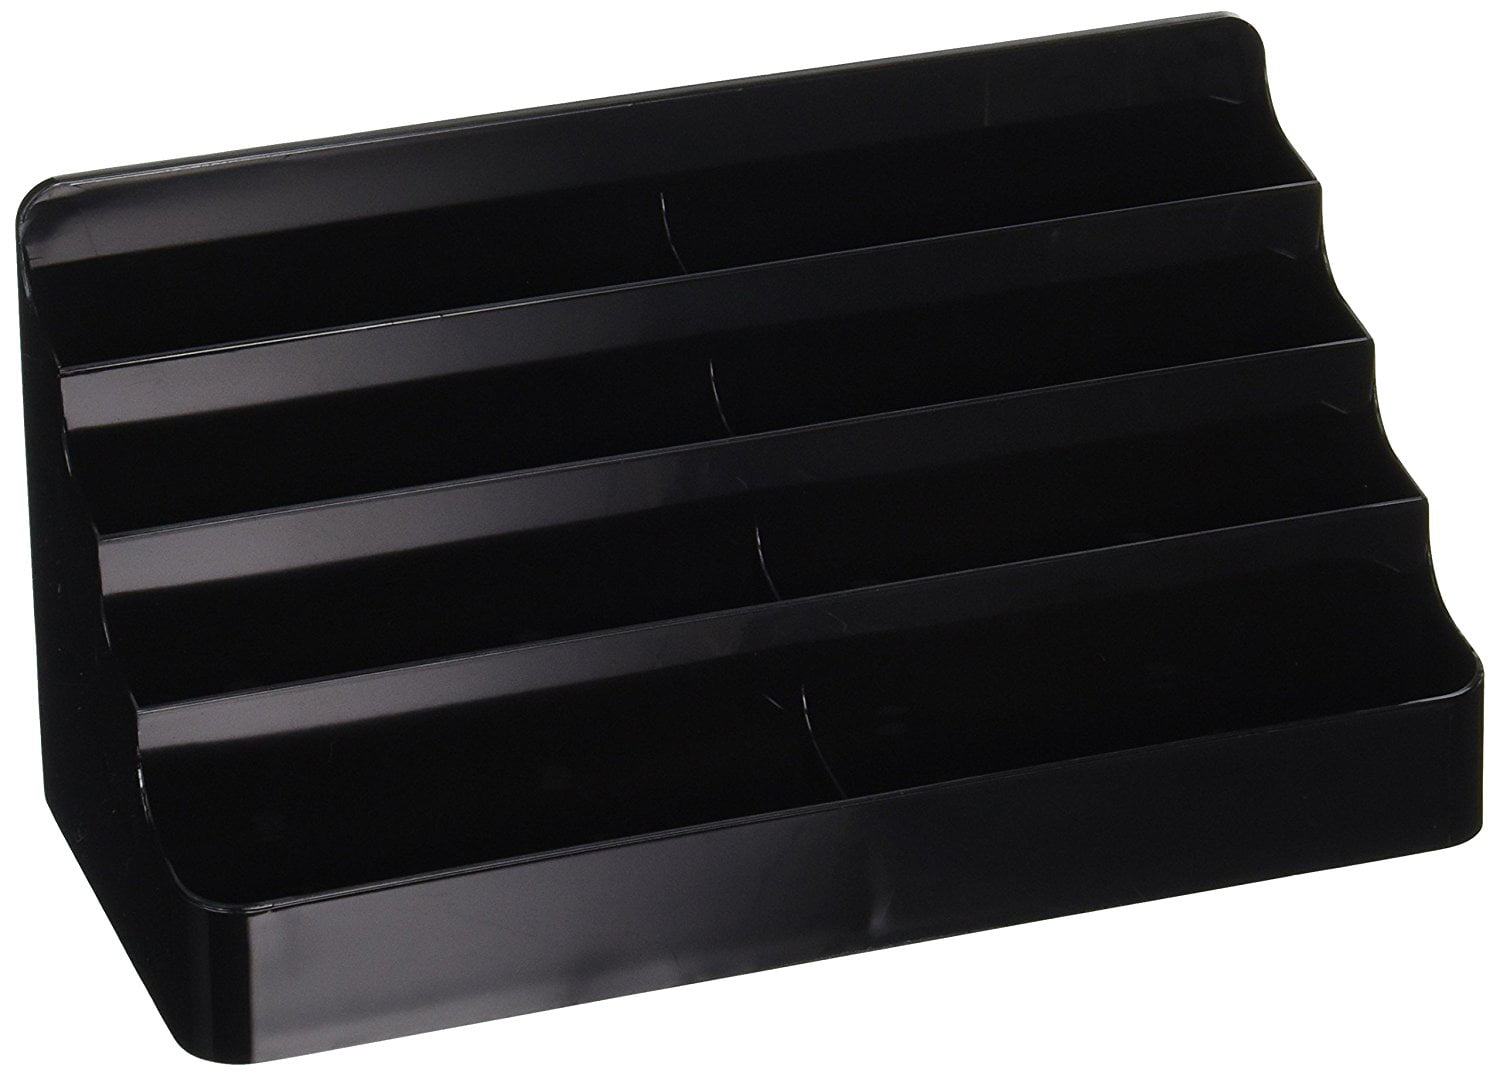 Black Holds 450 2 x 3.5 Cards Eight-Pocket 90804 Deflecto Recycled Business Card Holder